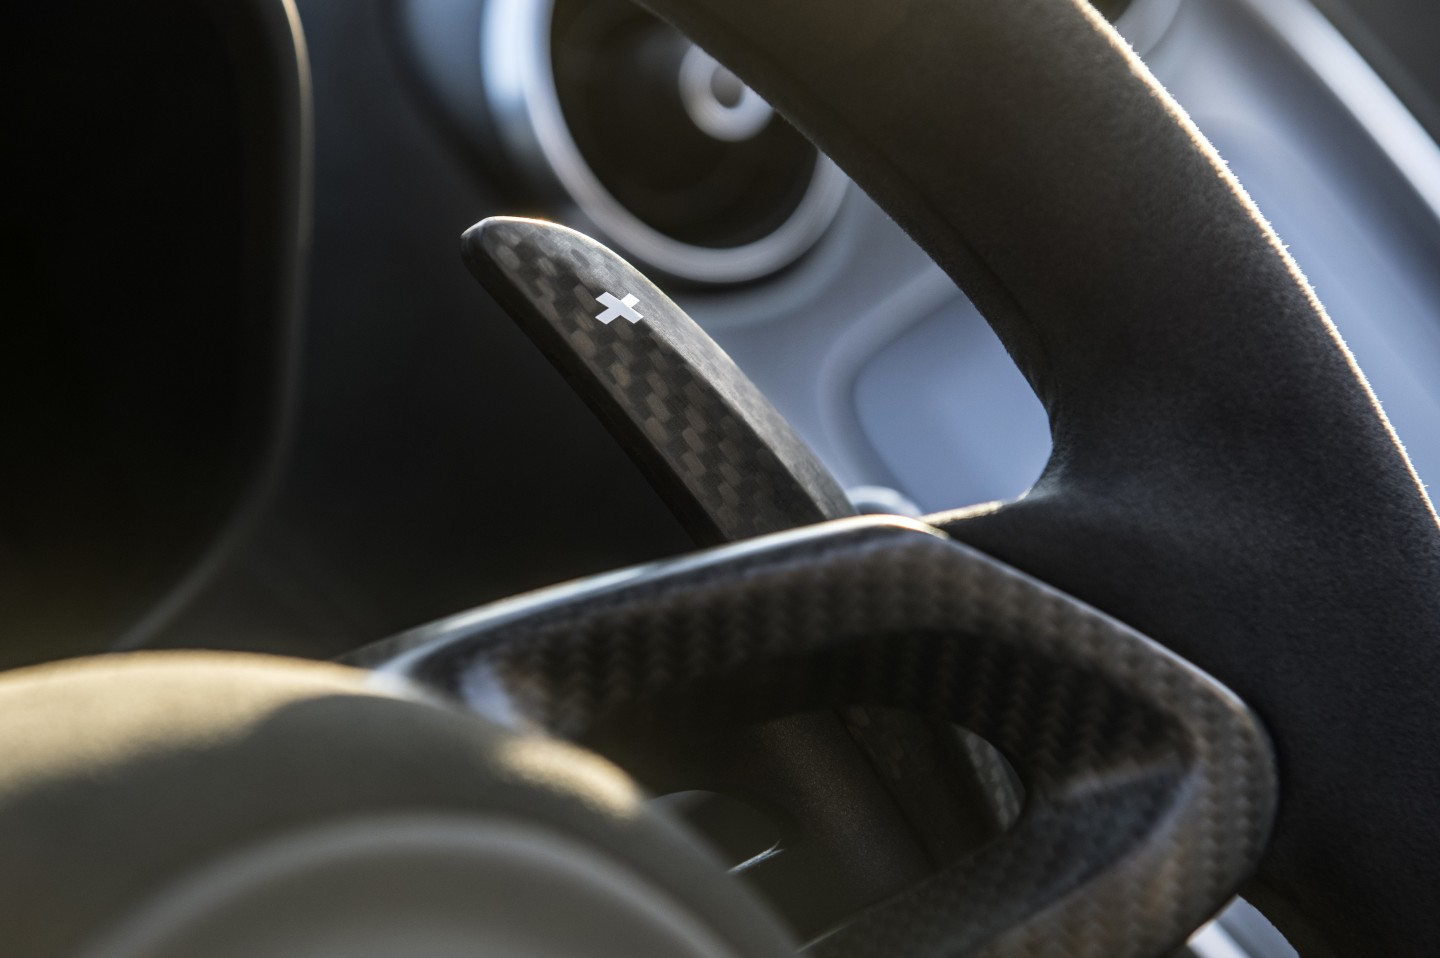 The integrated fiber paddle shifters on the McLaren's steering wheel are on a rocker, allowing up and down shifts to be made one-handed